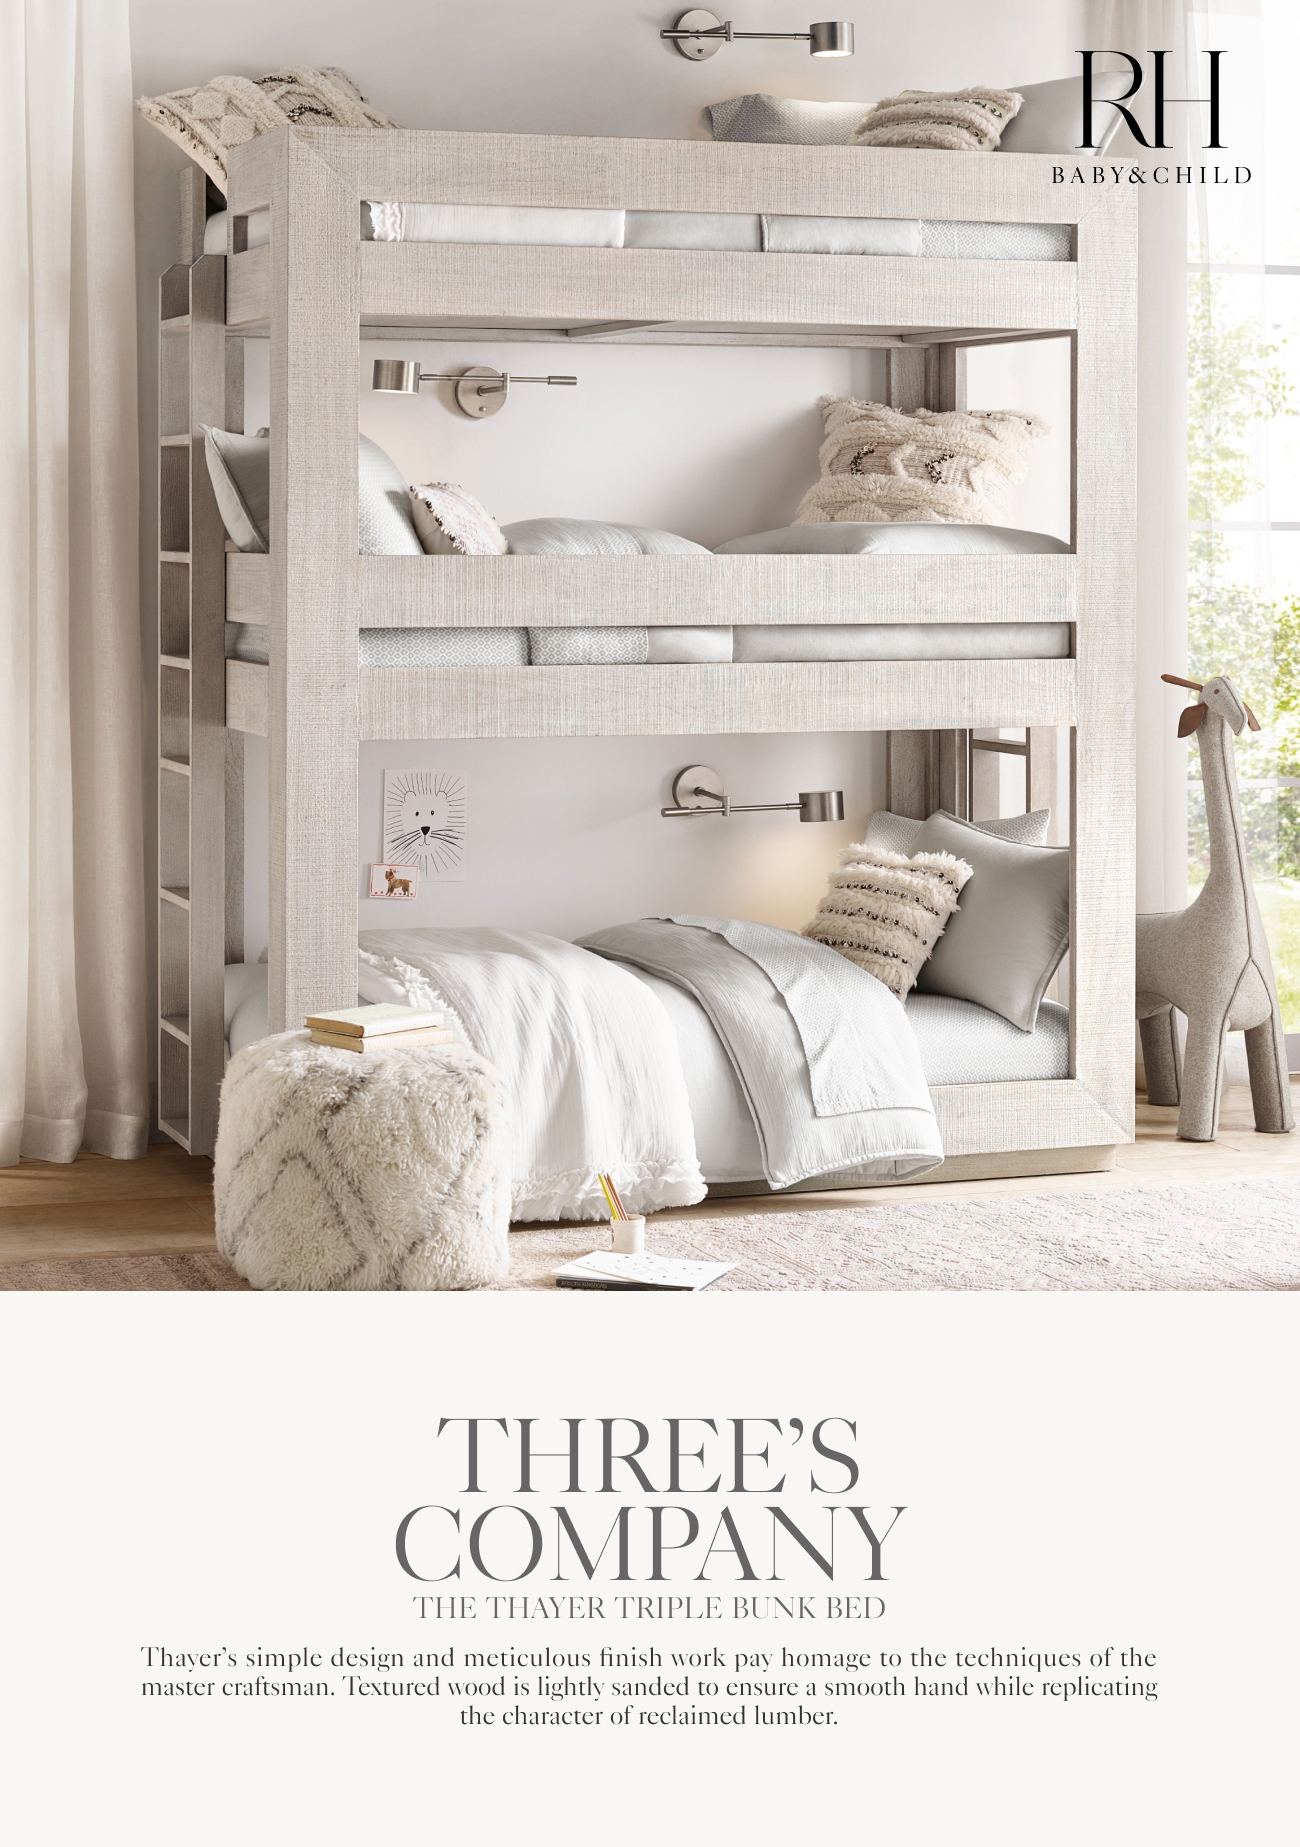  BABYCHILD THRELRS COMPANY THE THAYER TRIPLE BUNK BED Thayers simple design and meticulous finish work pay homage to the techniques of the master craftsman. Textured wood is lightly sanded to ensure a smooth hand while replicating the character of reclaimed lumber. 